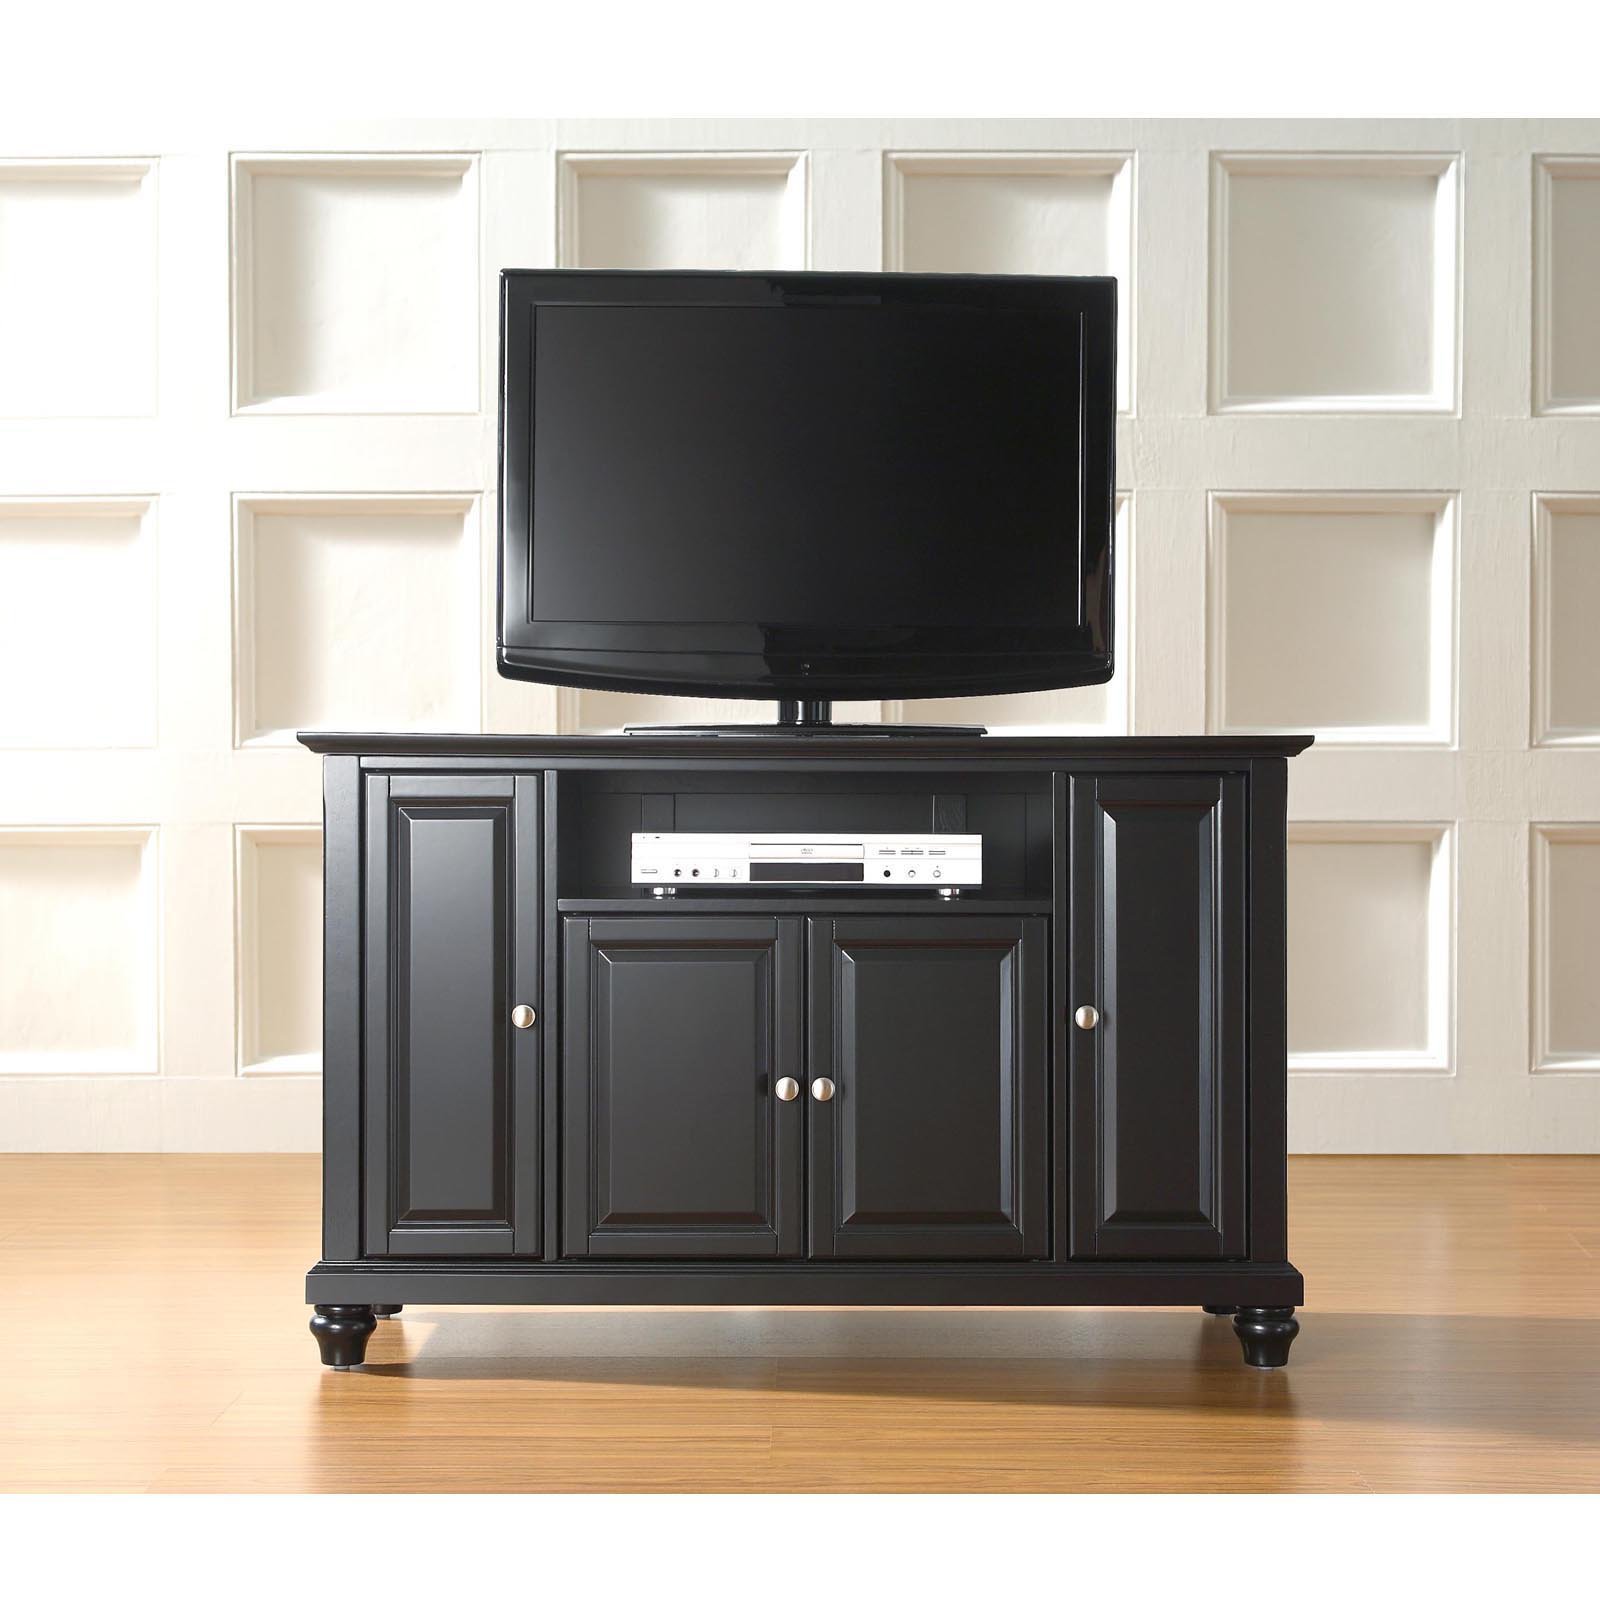 CAMBRIDGE 48" TV STAND IN BLACK FINISH - image 3 of 11